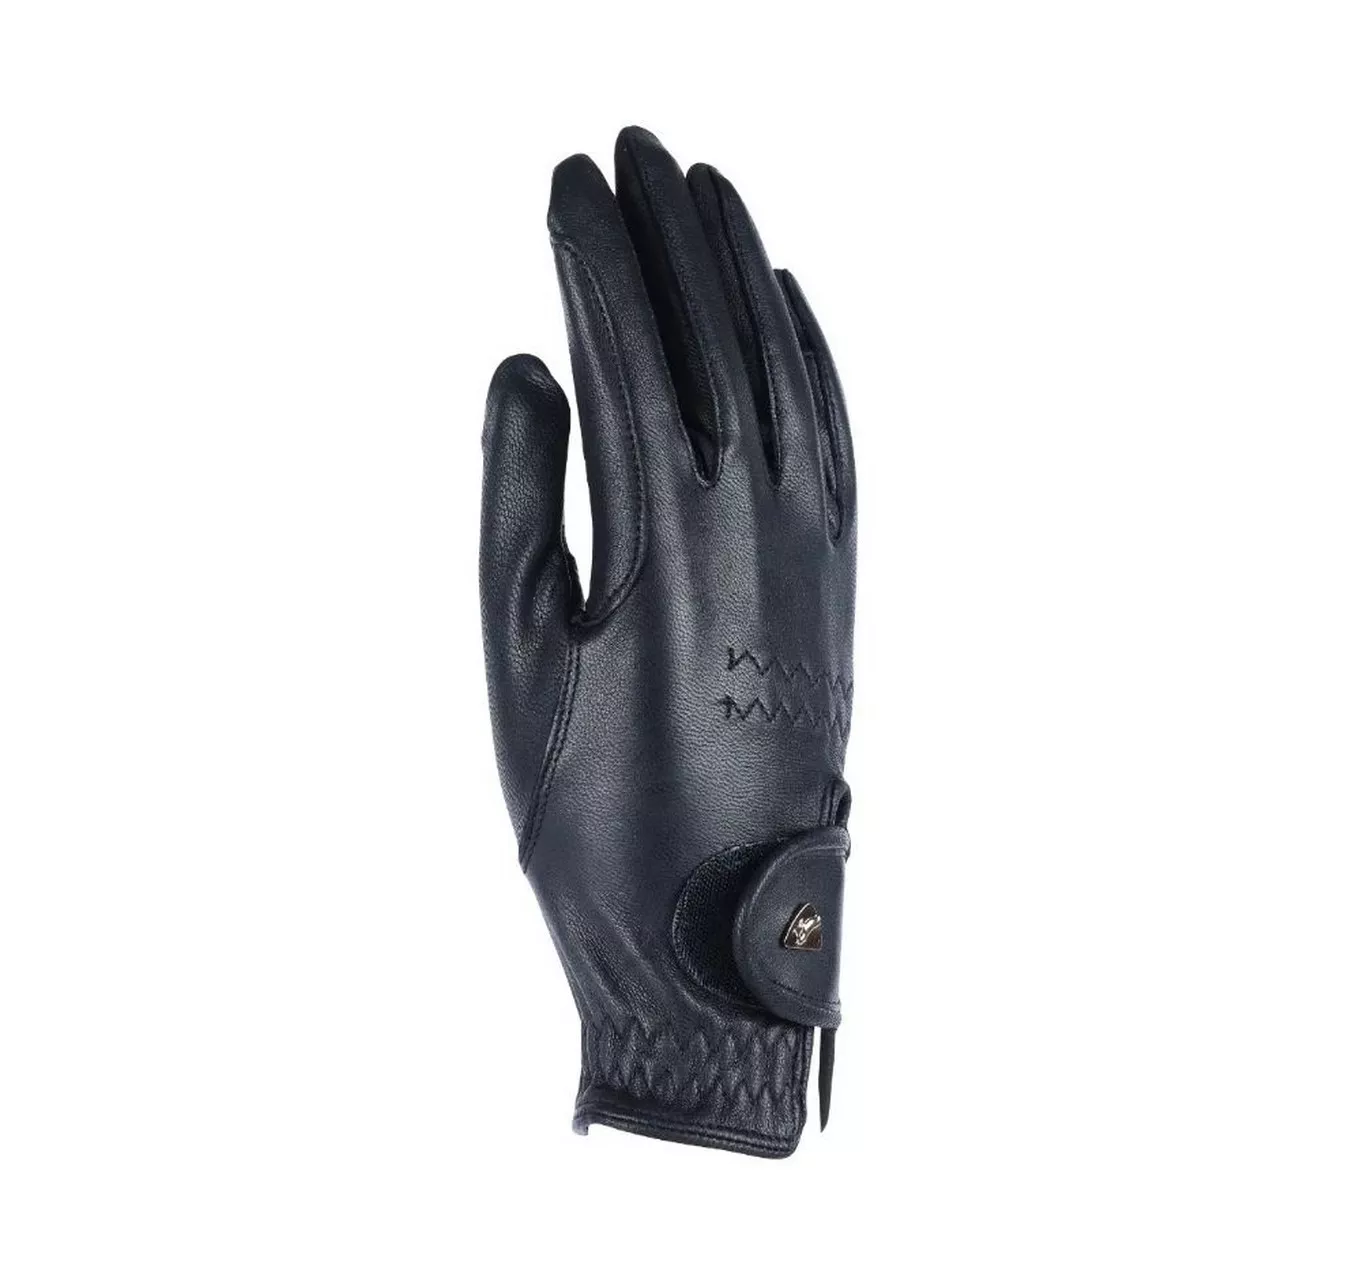 Leather Riding Gloves Black XS